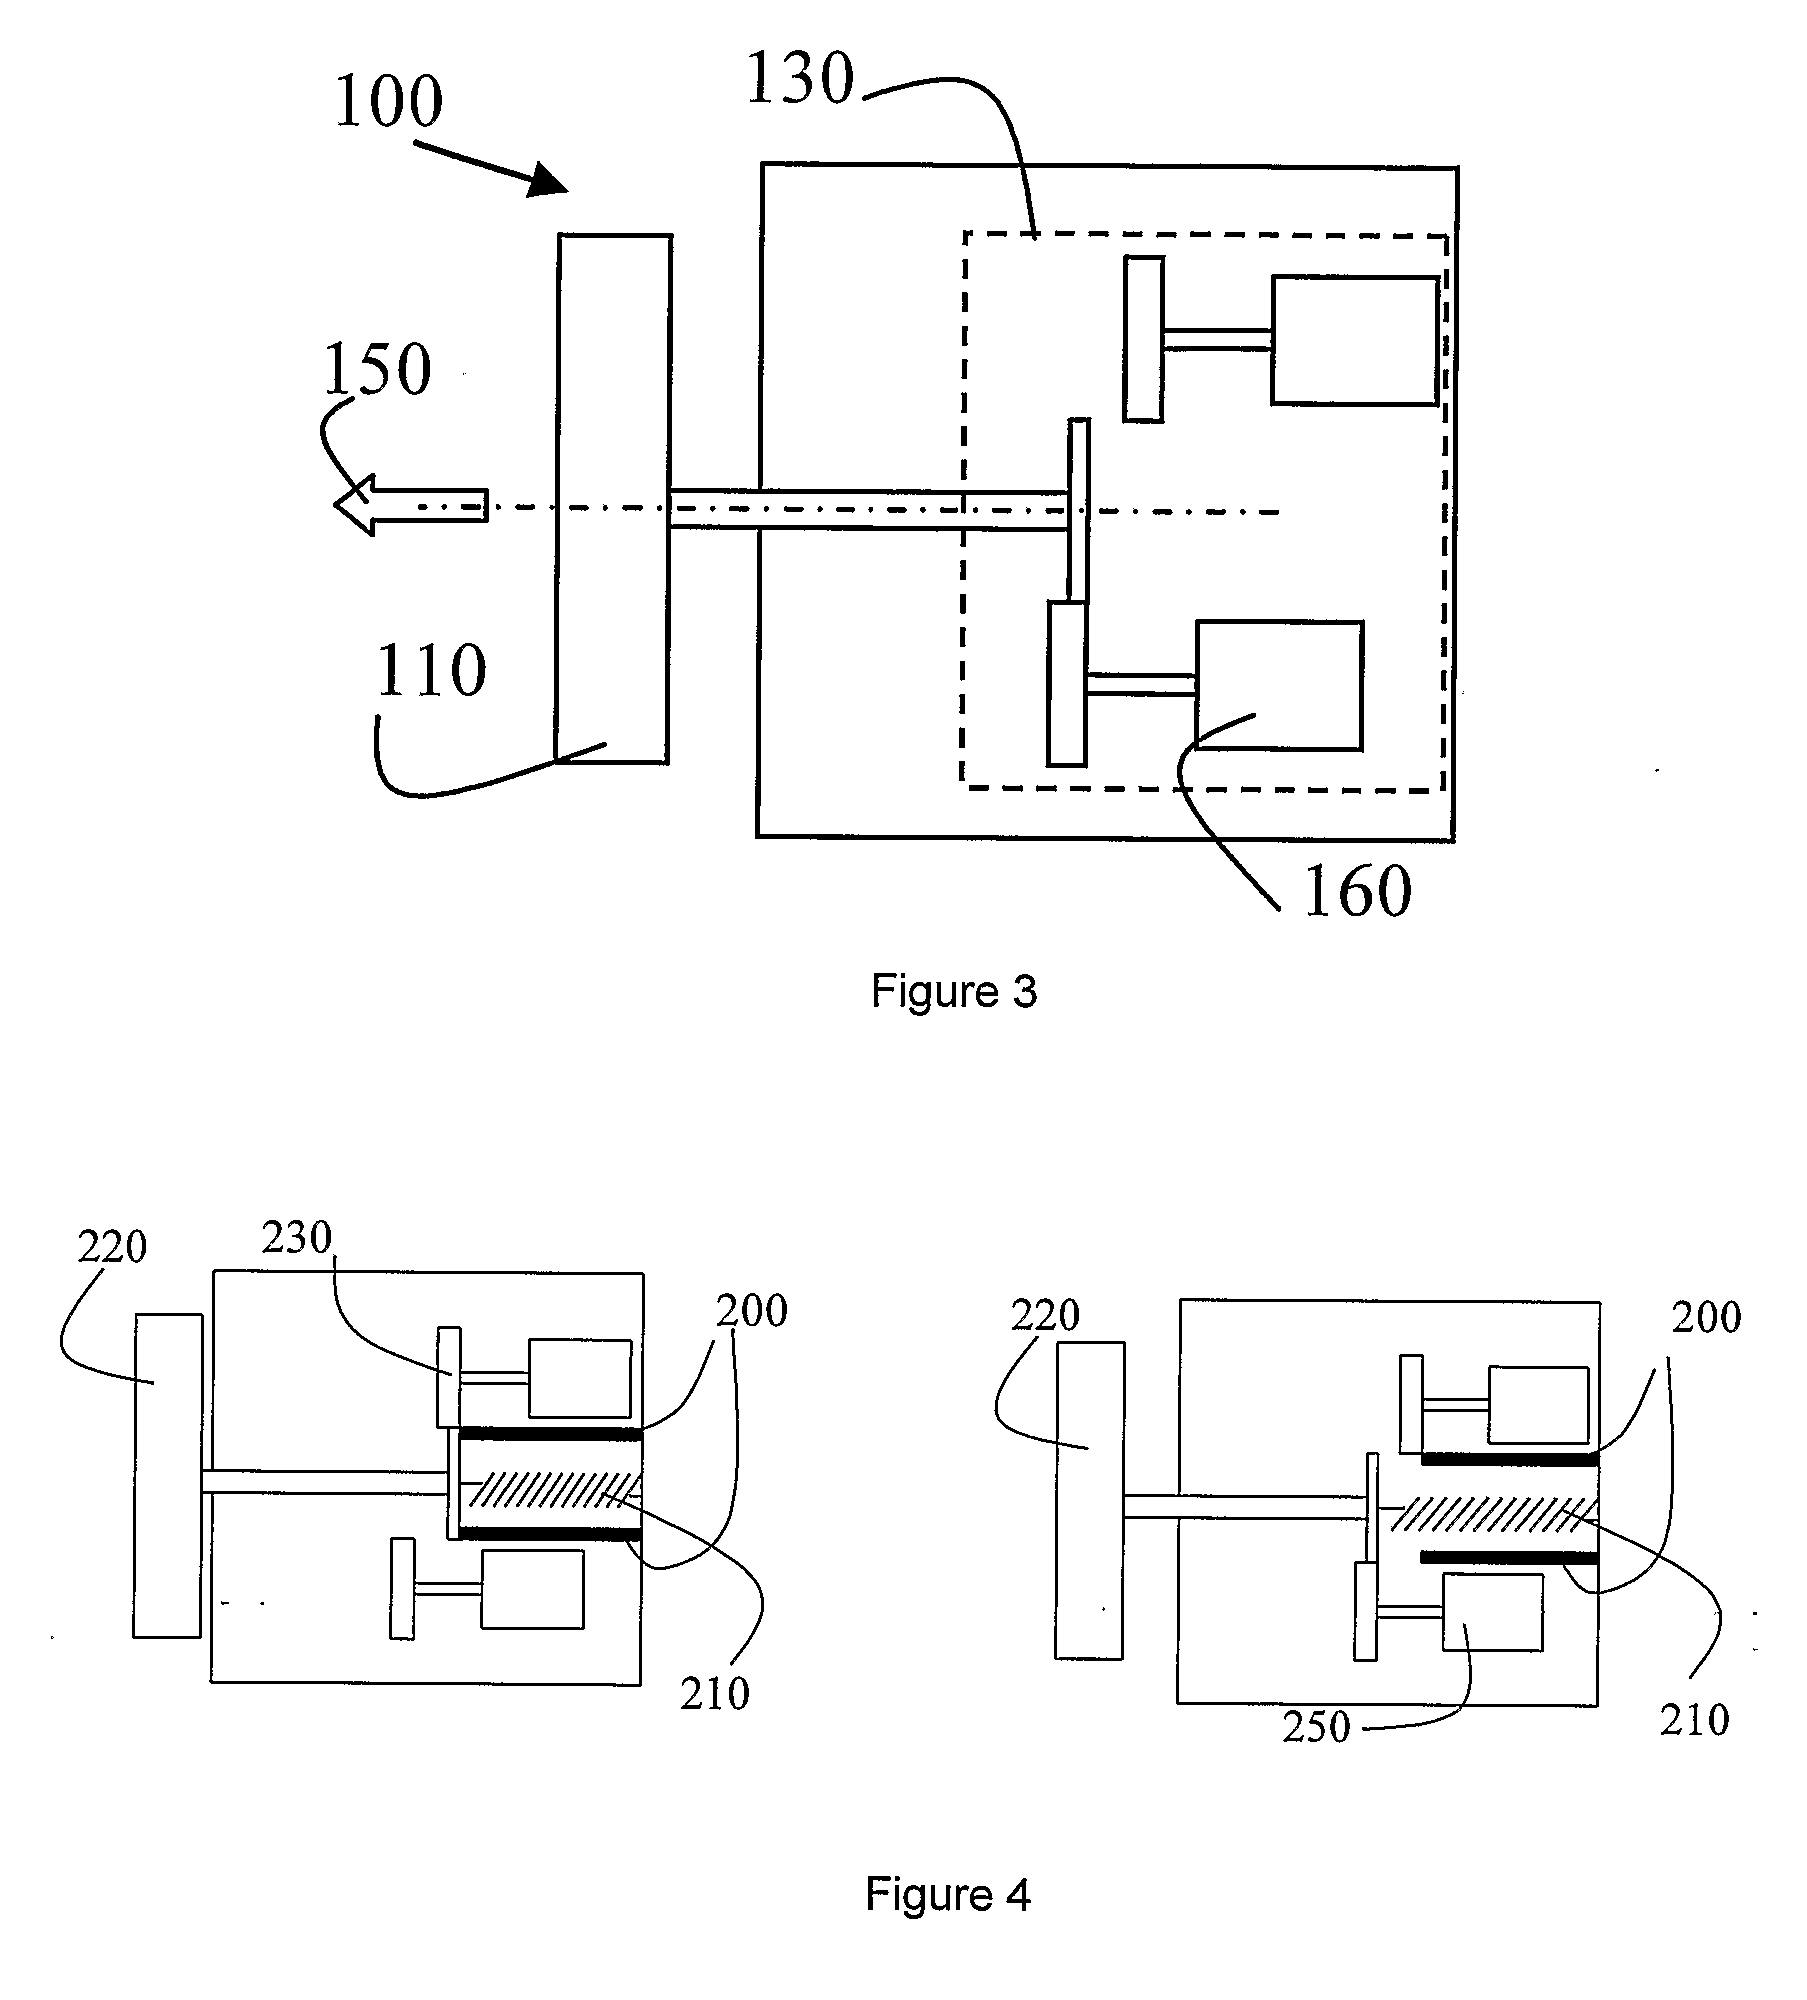 Illumination System Comprising A Light Source And A Control Unit And An Illumination Control System For Controlling A Light Source By Multiple User Interface Surfaces